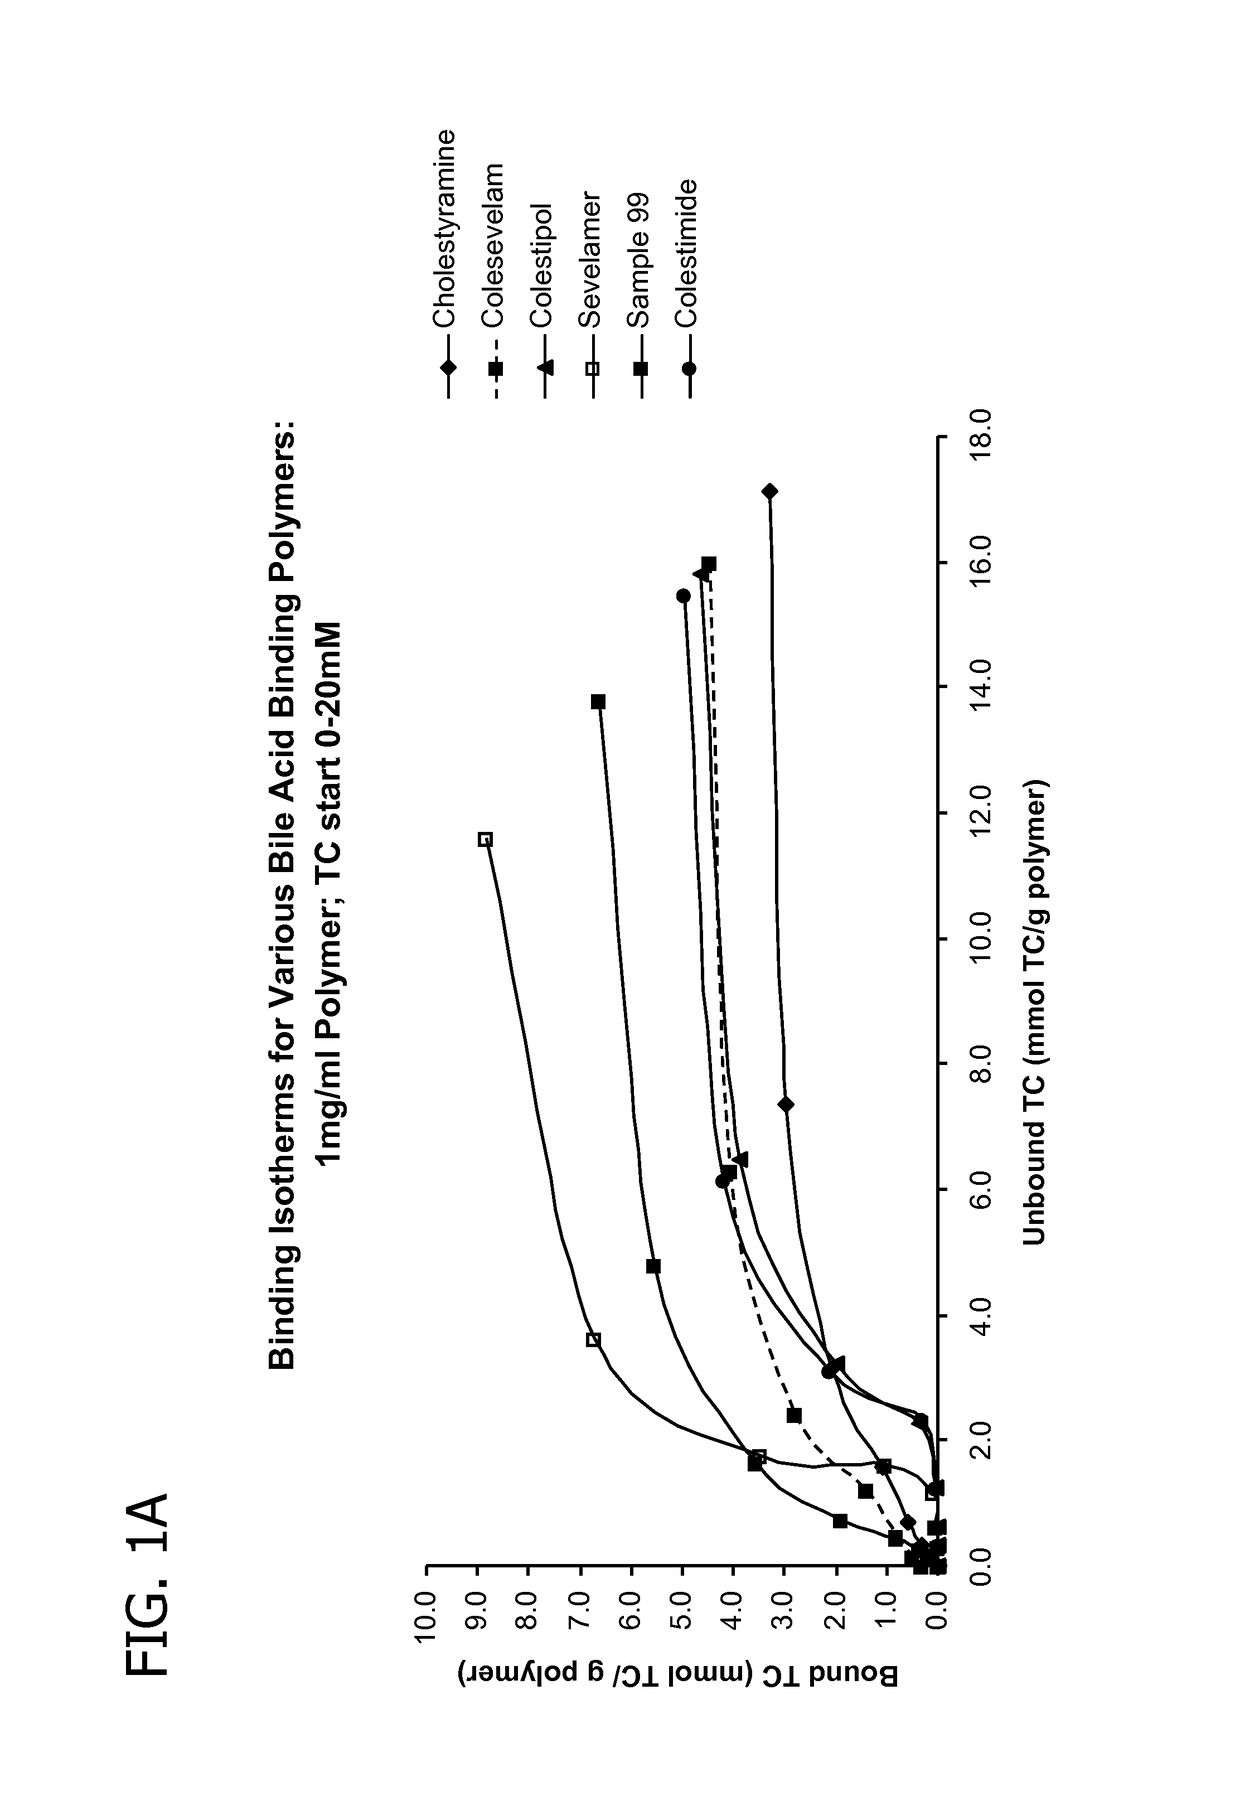 Amine polymers for use as bile acid sequestrants